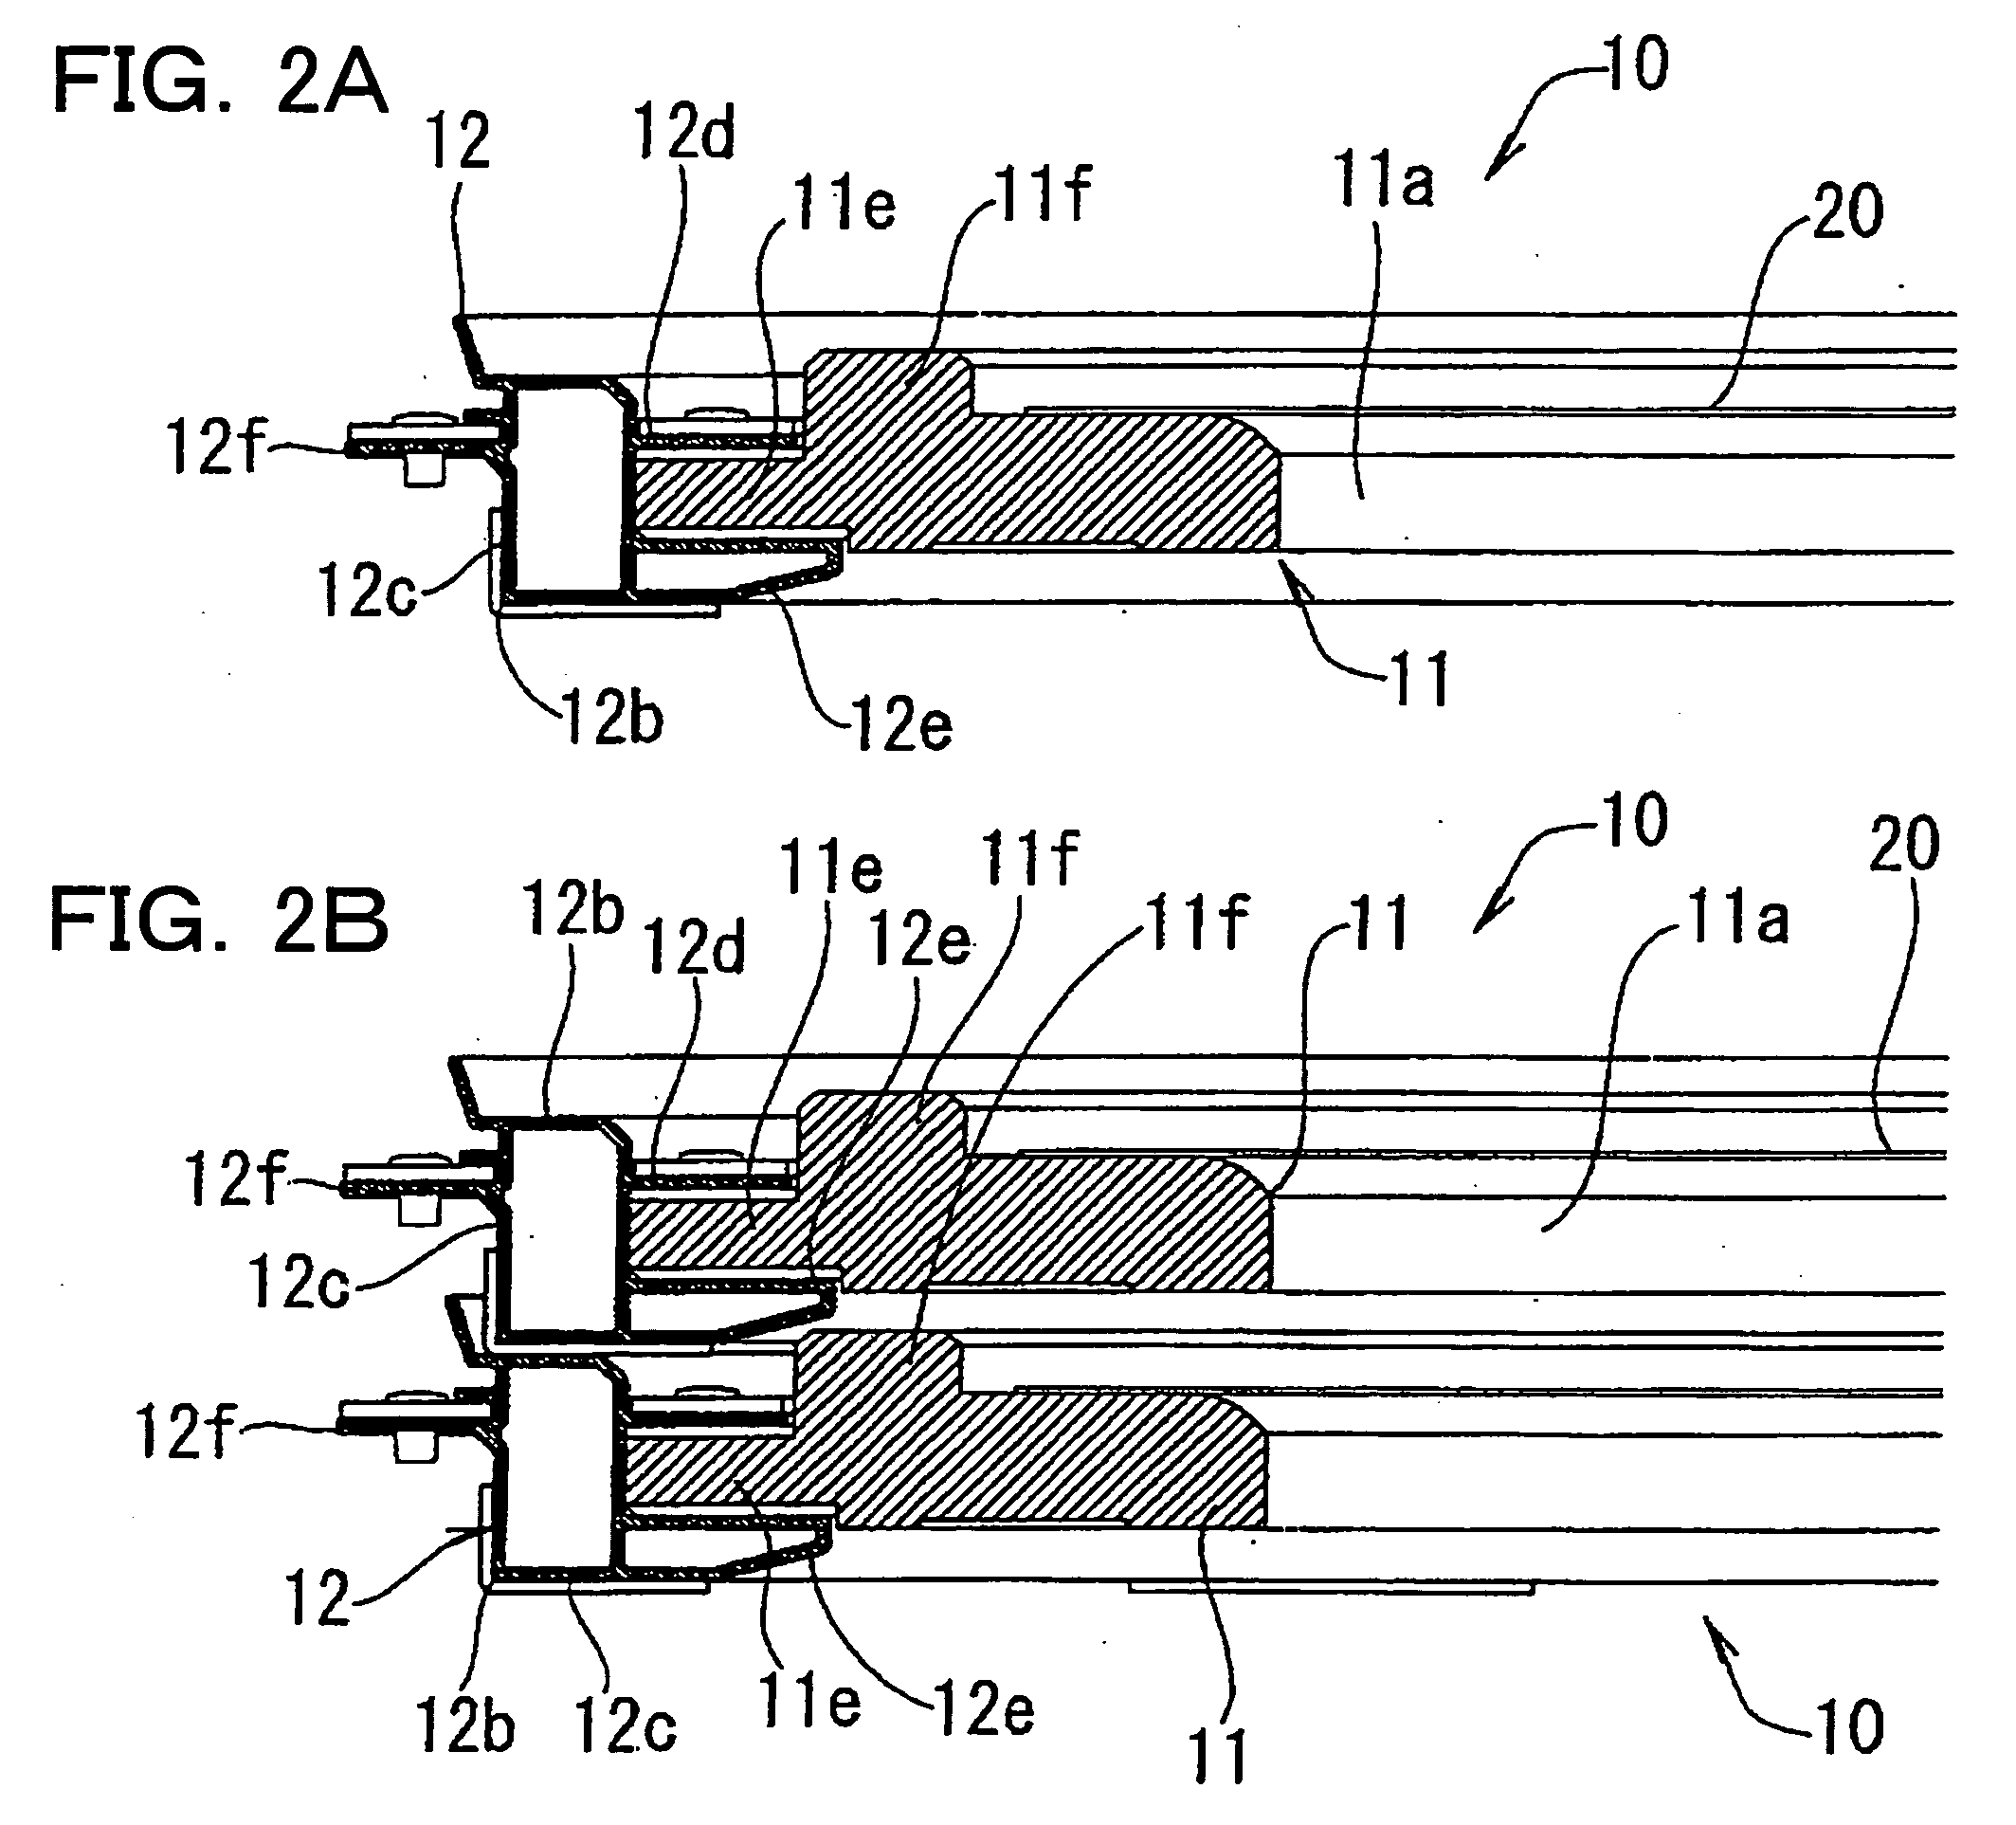 Substrate accommodating tray